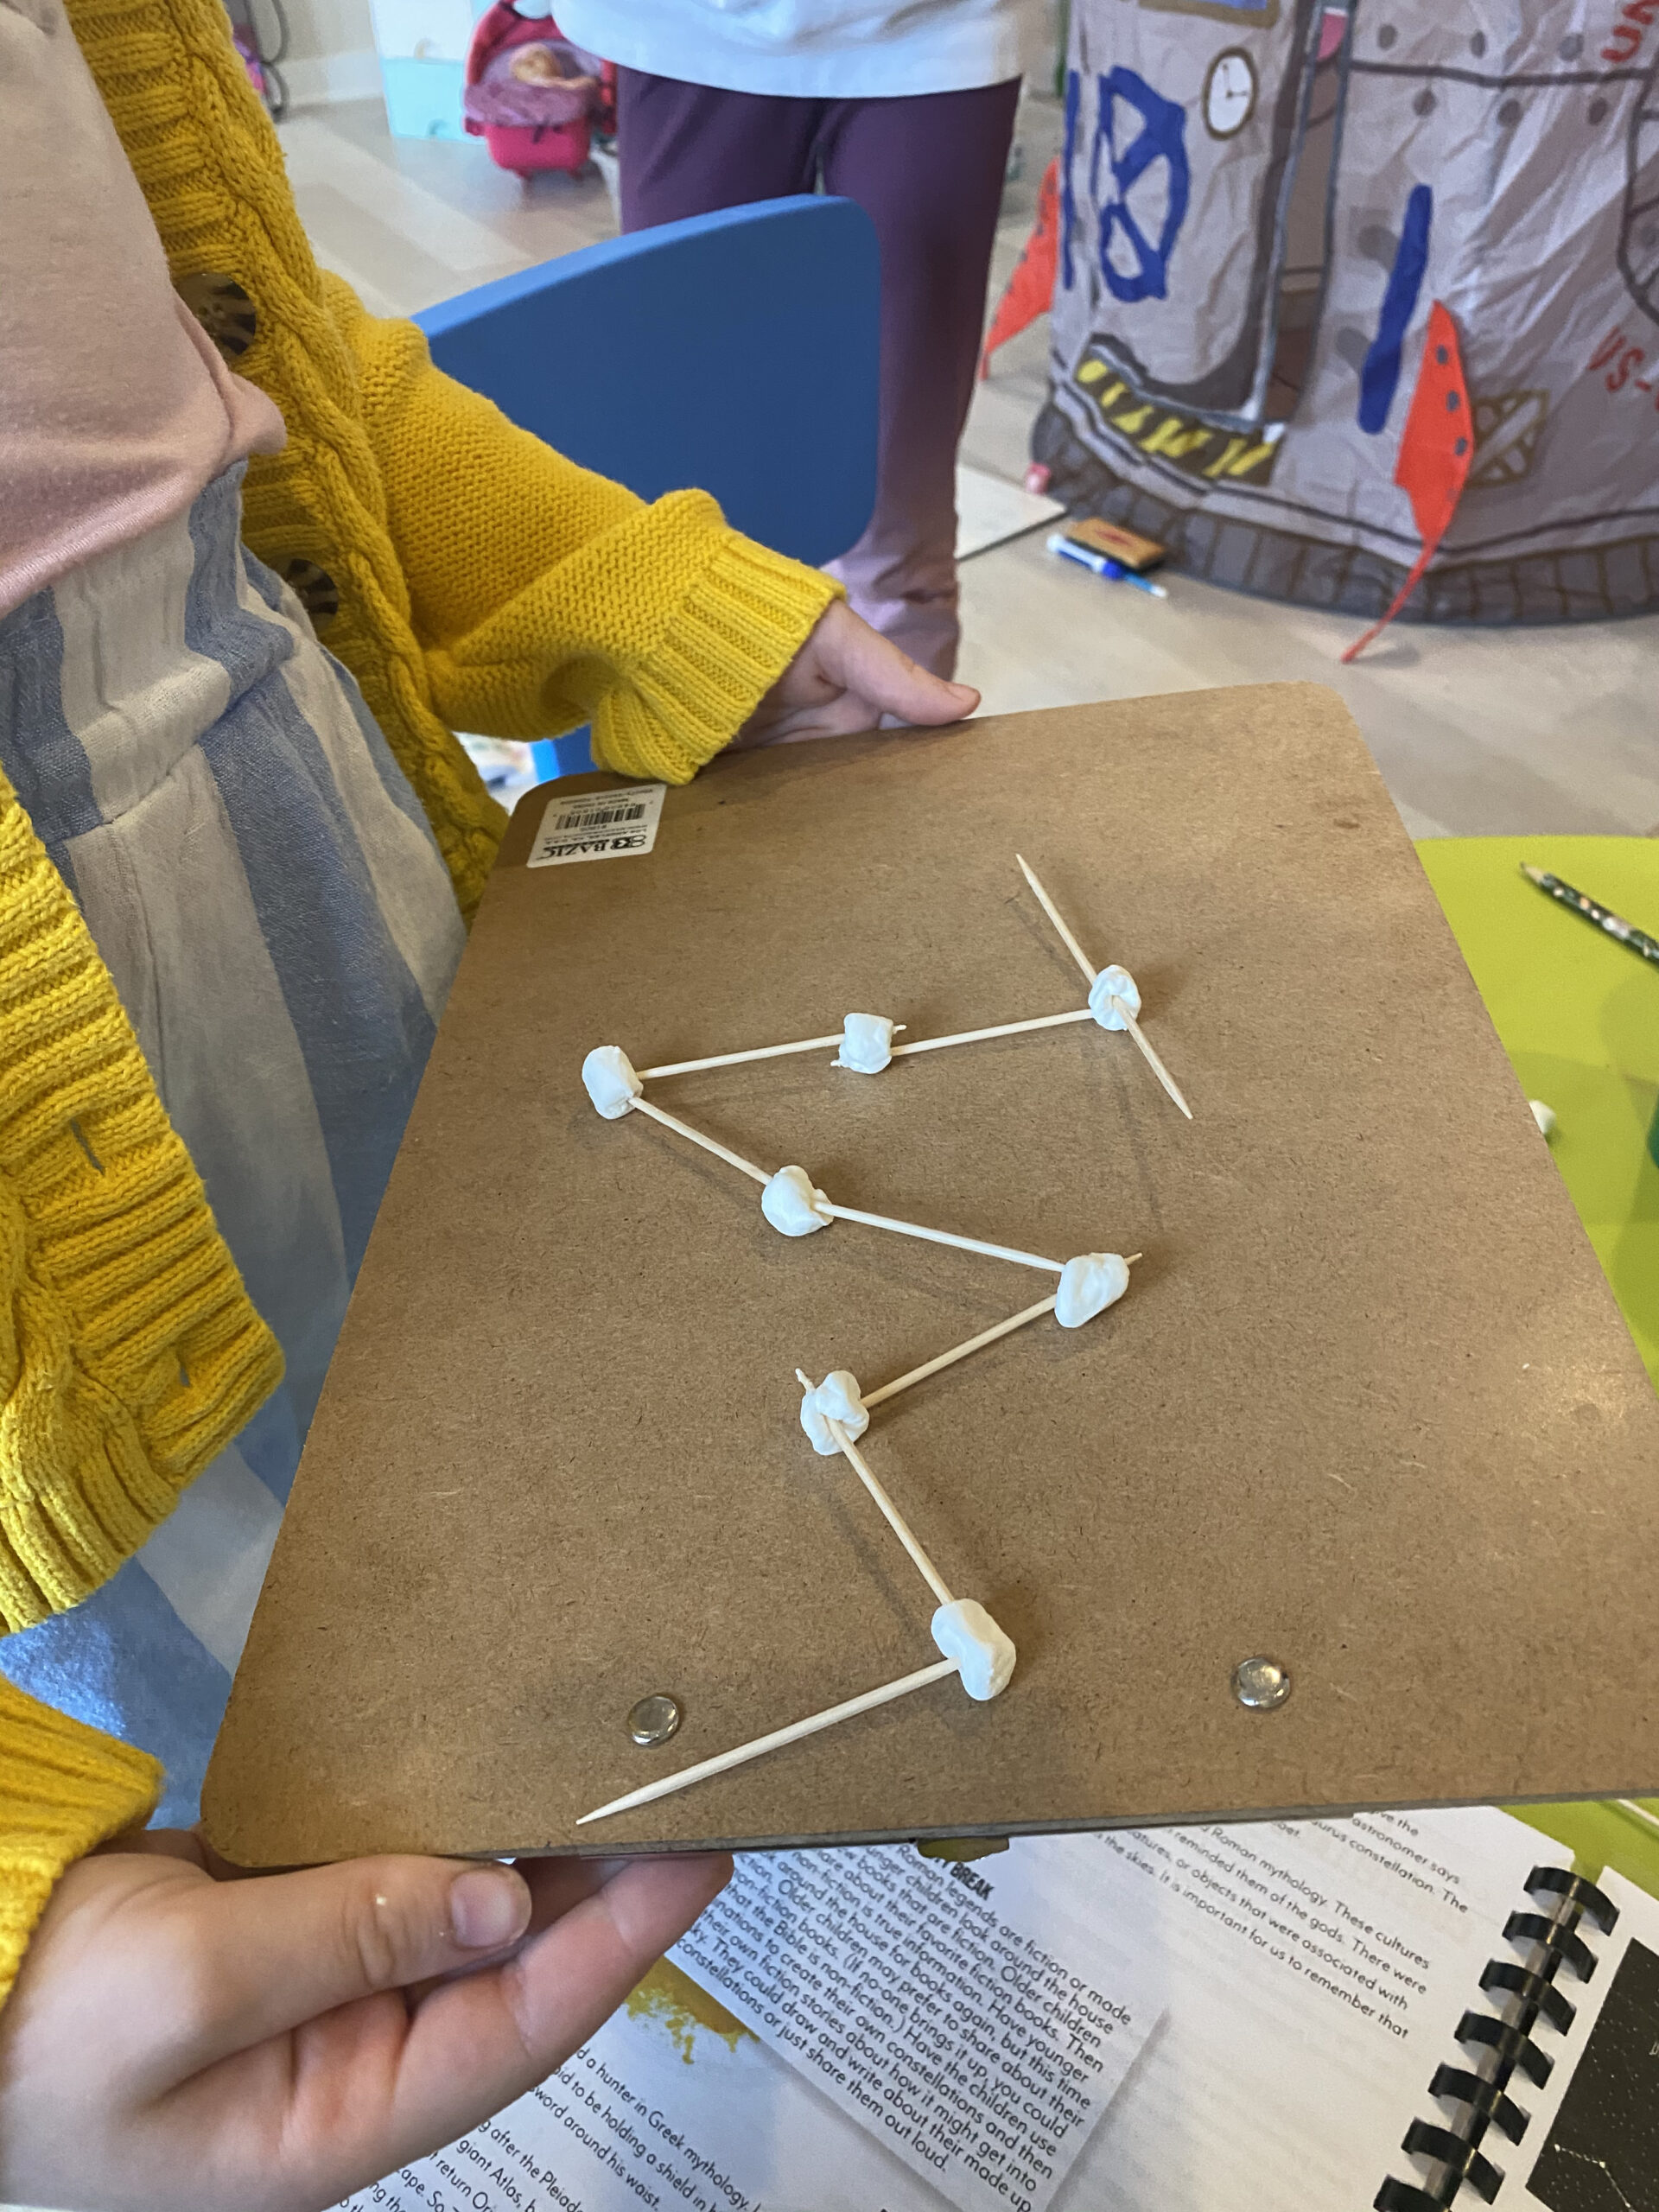 STEM activity. Marshmallow Constellations: Let's create some constellations using mini marshmallows and toothpicks. Have fun and learn about the stars.